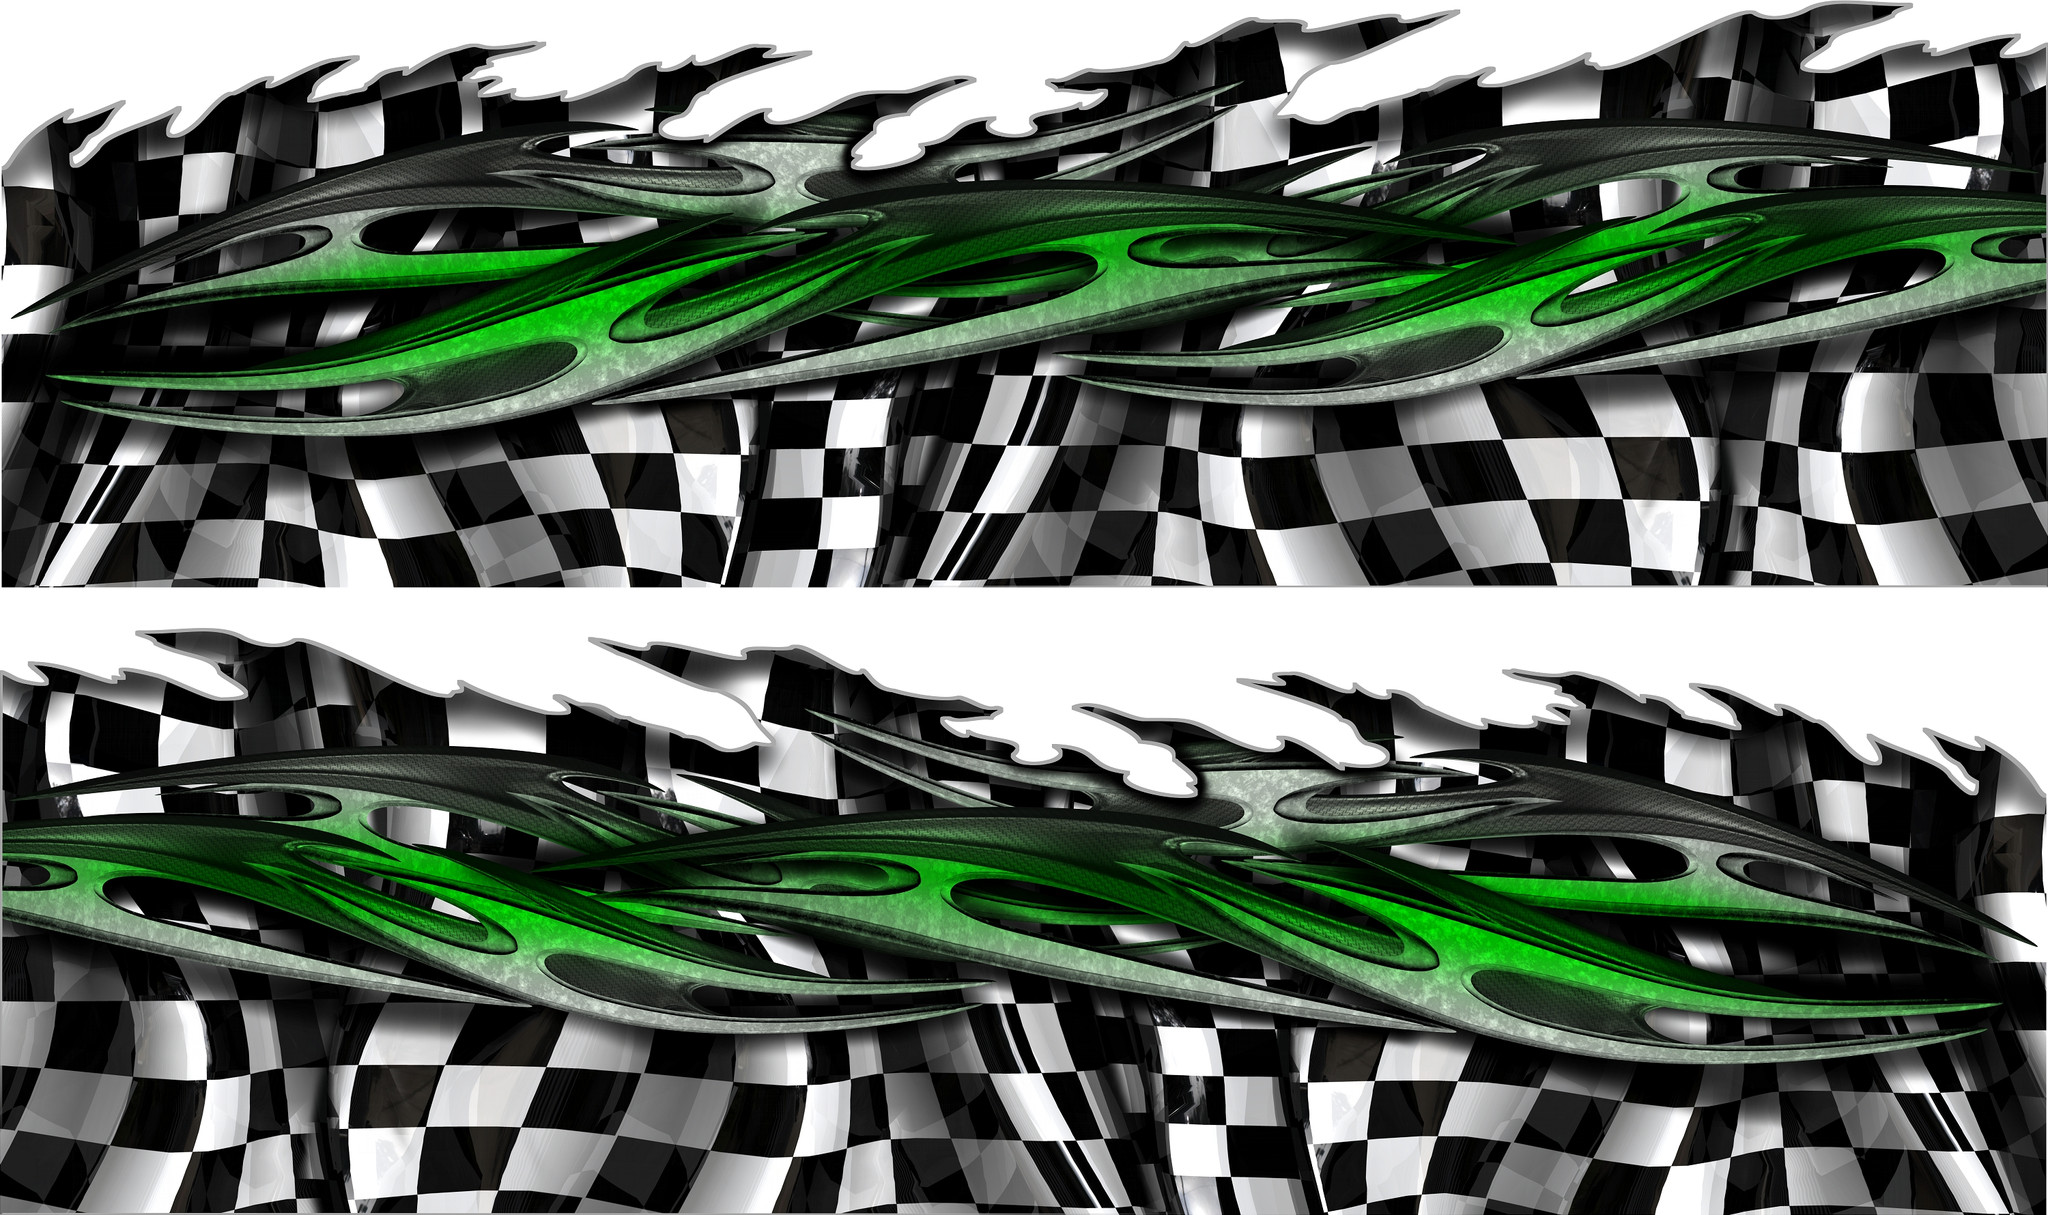 12-checkered-graphic-designs-for-cars-images-checkered-flag-vinyl-car